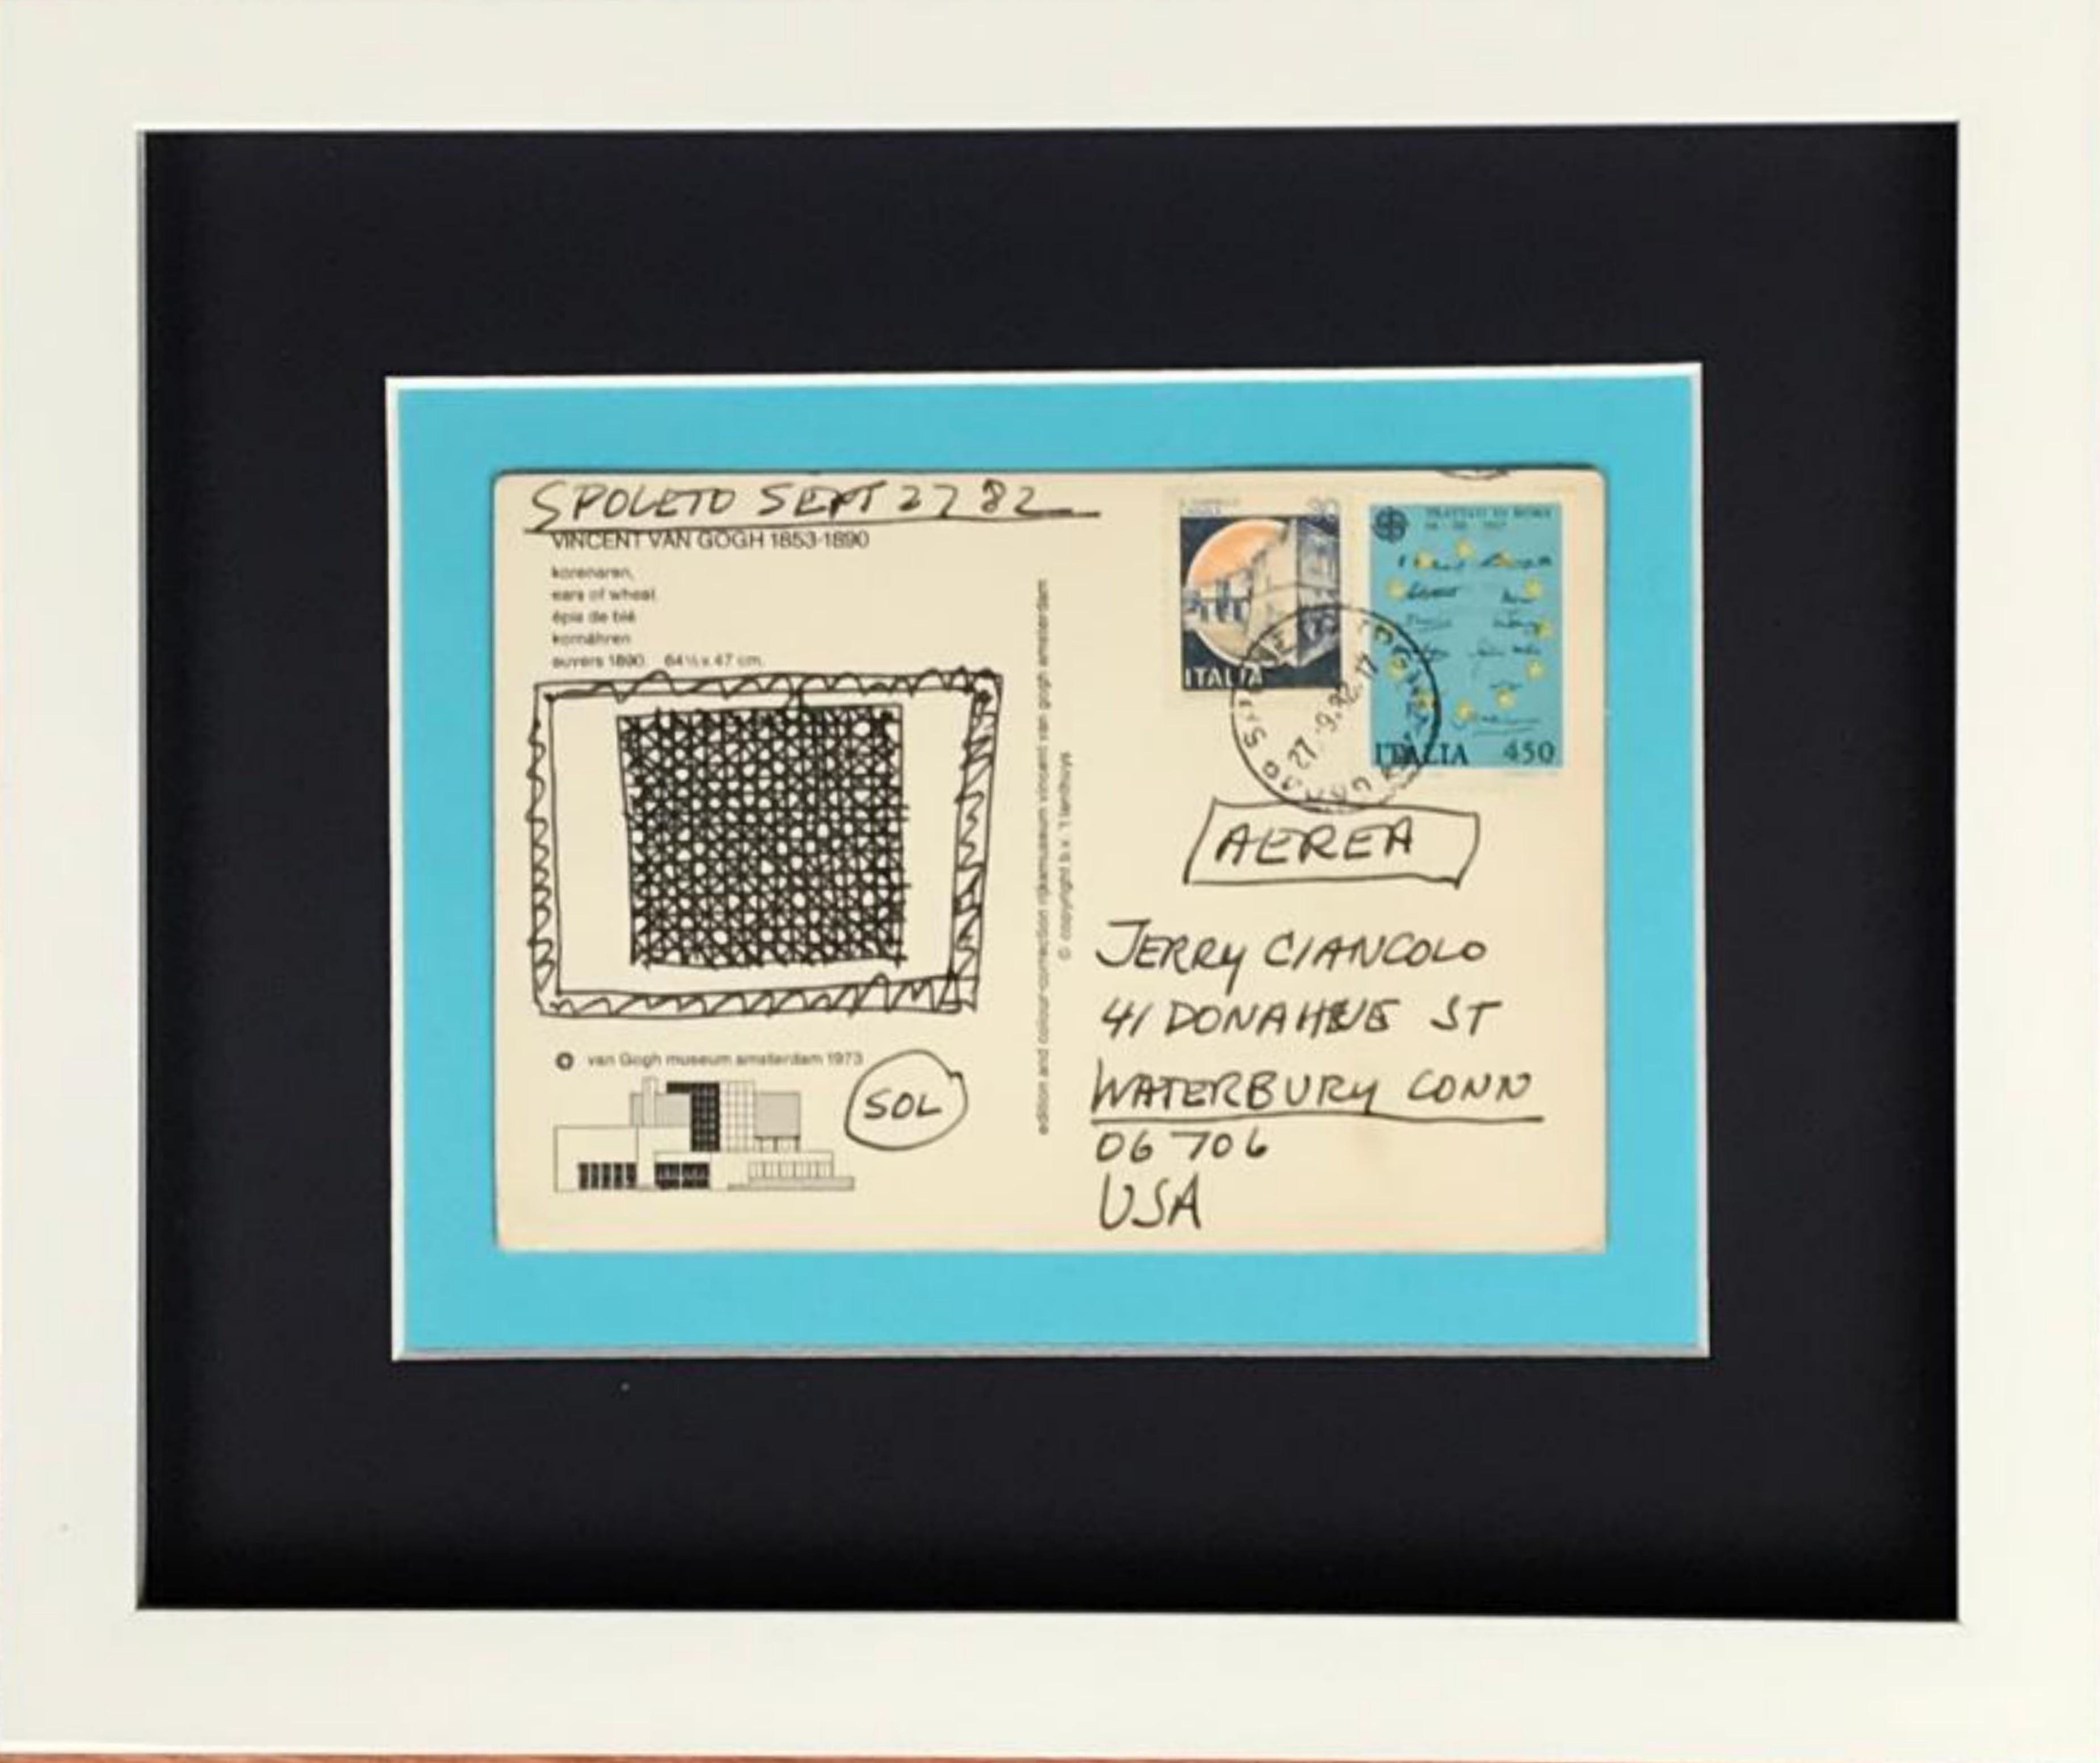 Unique drawing Geometric Abstraction on postcard conceptual art (hand signed) - Abstract Geometric Art by Sol LeWitt